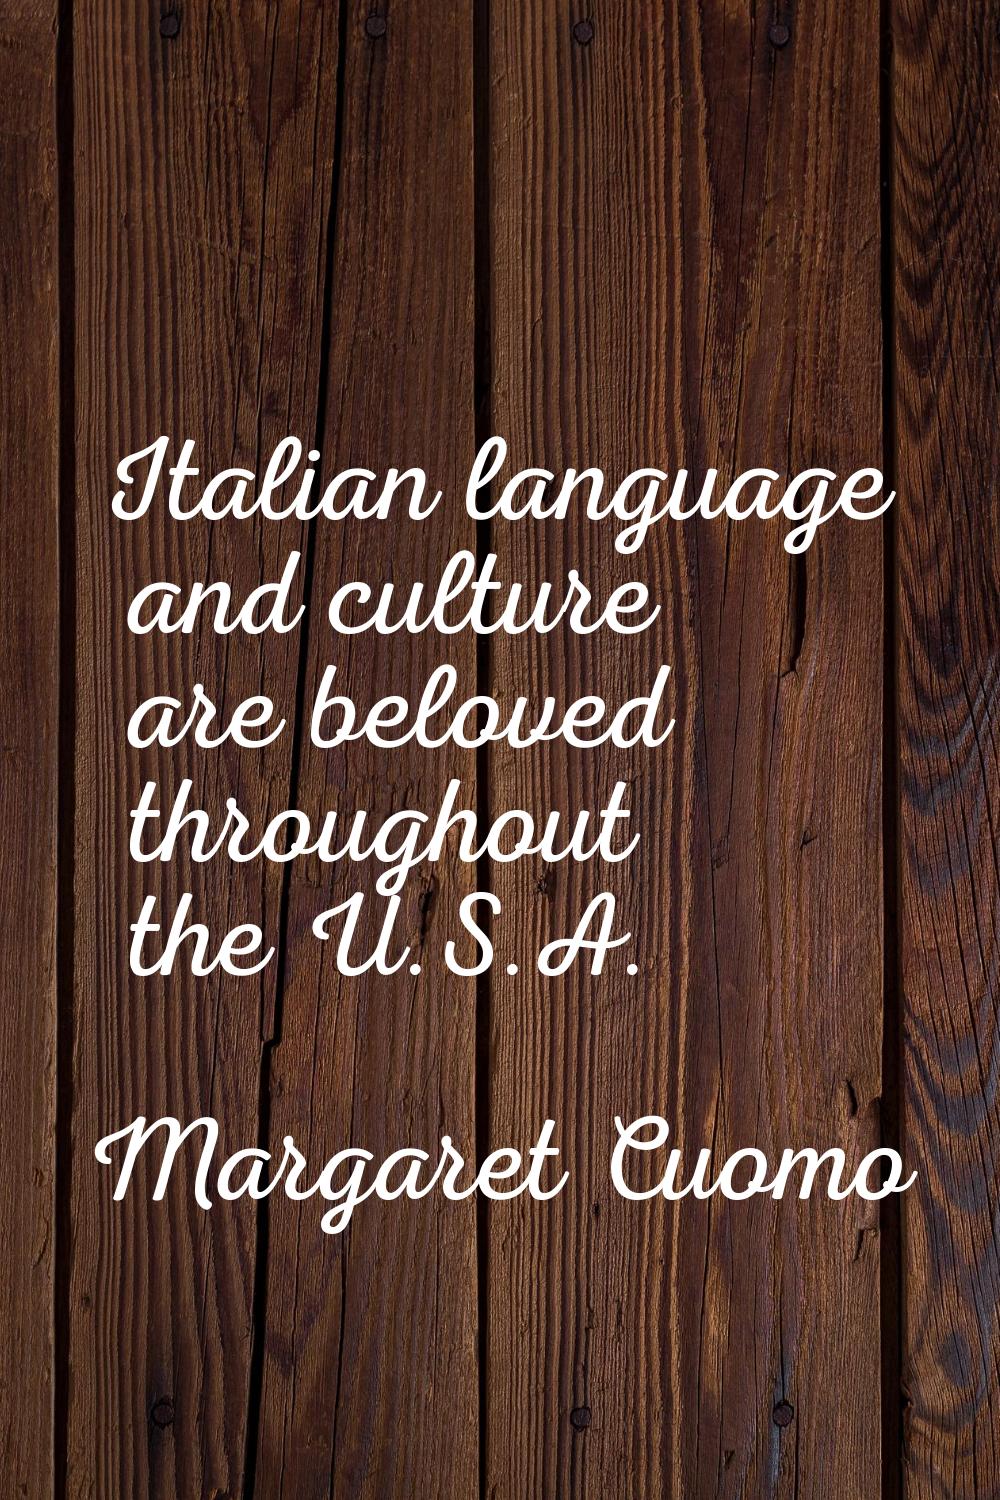 Italian language and culture are beloved throughout the U.S.A.